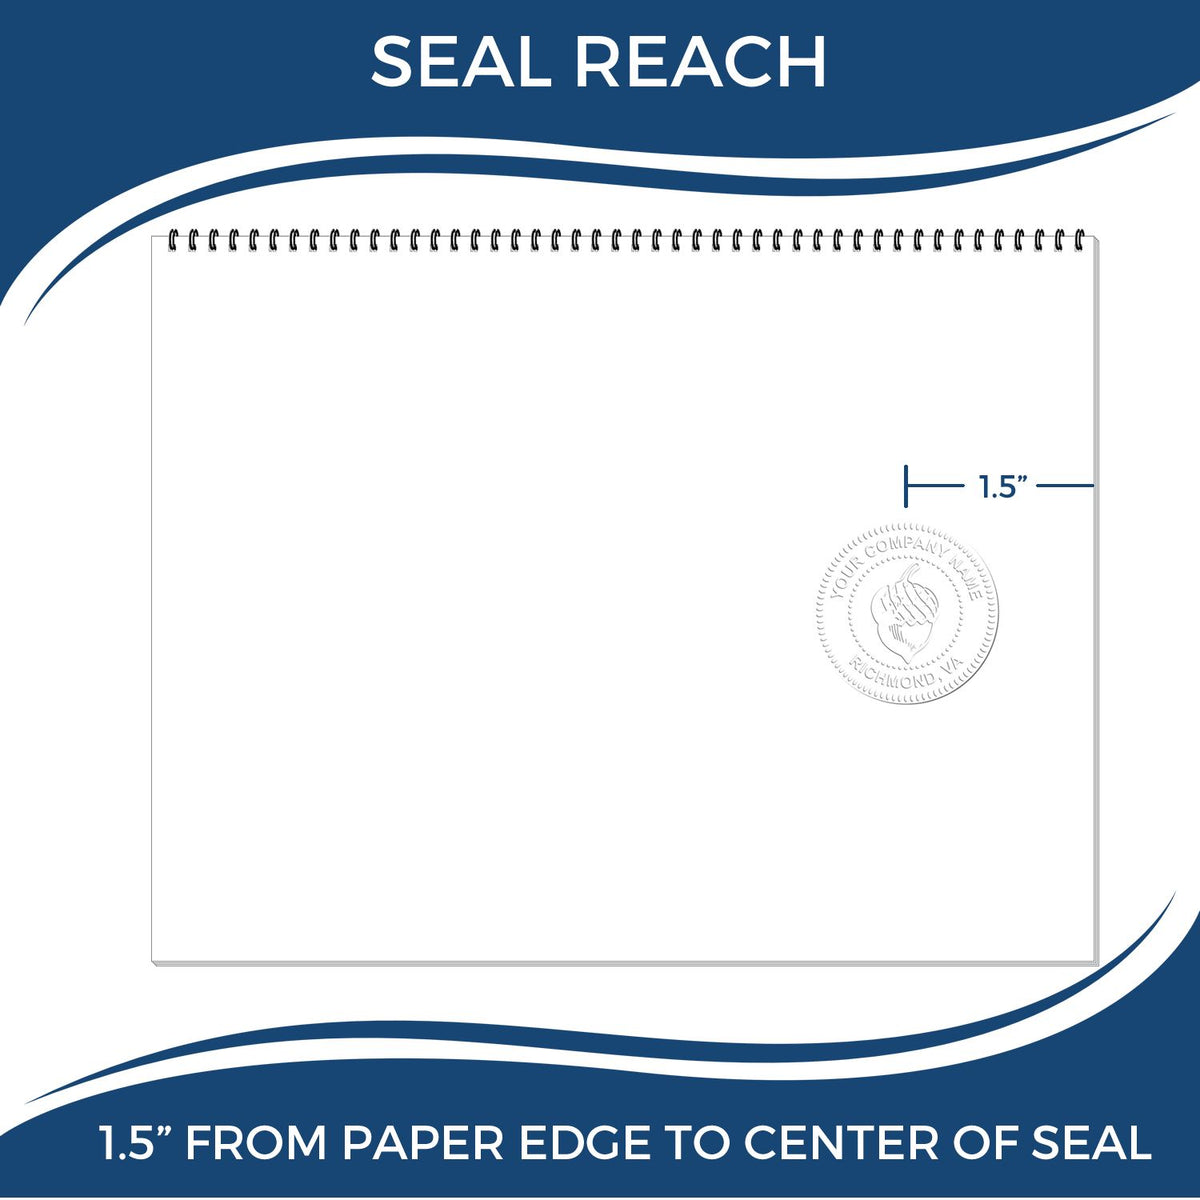 An infographic showing the seal reach which is represented by a ruler and a miniature seal image of the Hybrid Ohio Geologist Seal